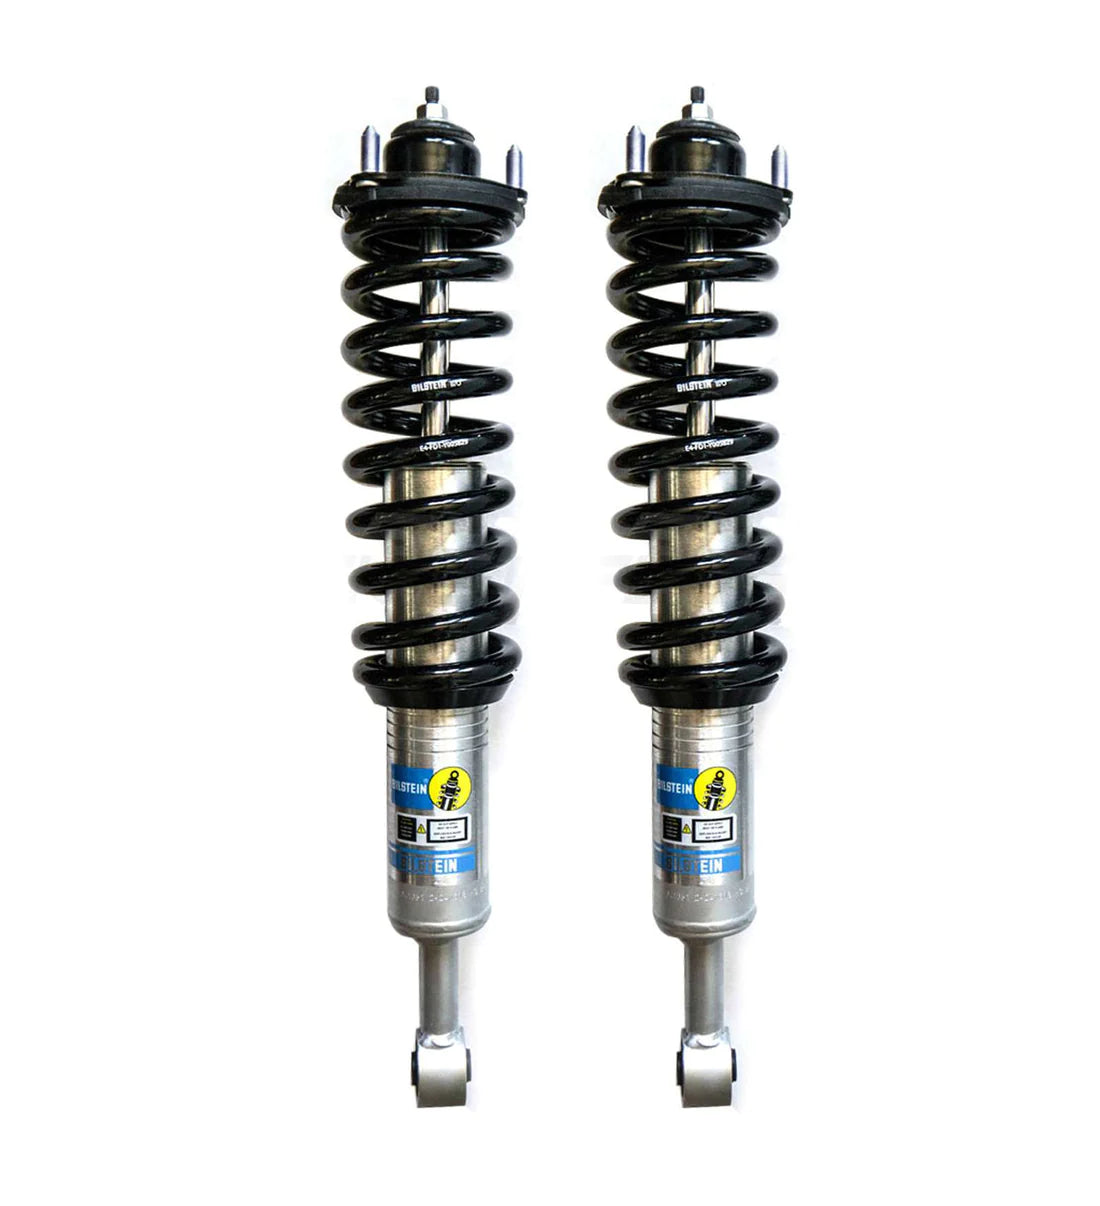 Bilstein 6112 Series Front Shock Kit for 2016+ Tacoma 2016+ Tacoma